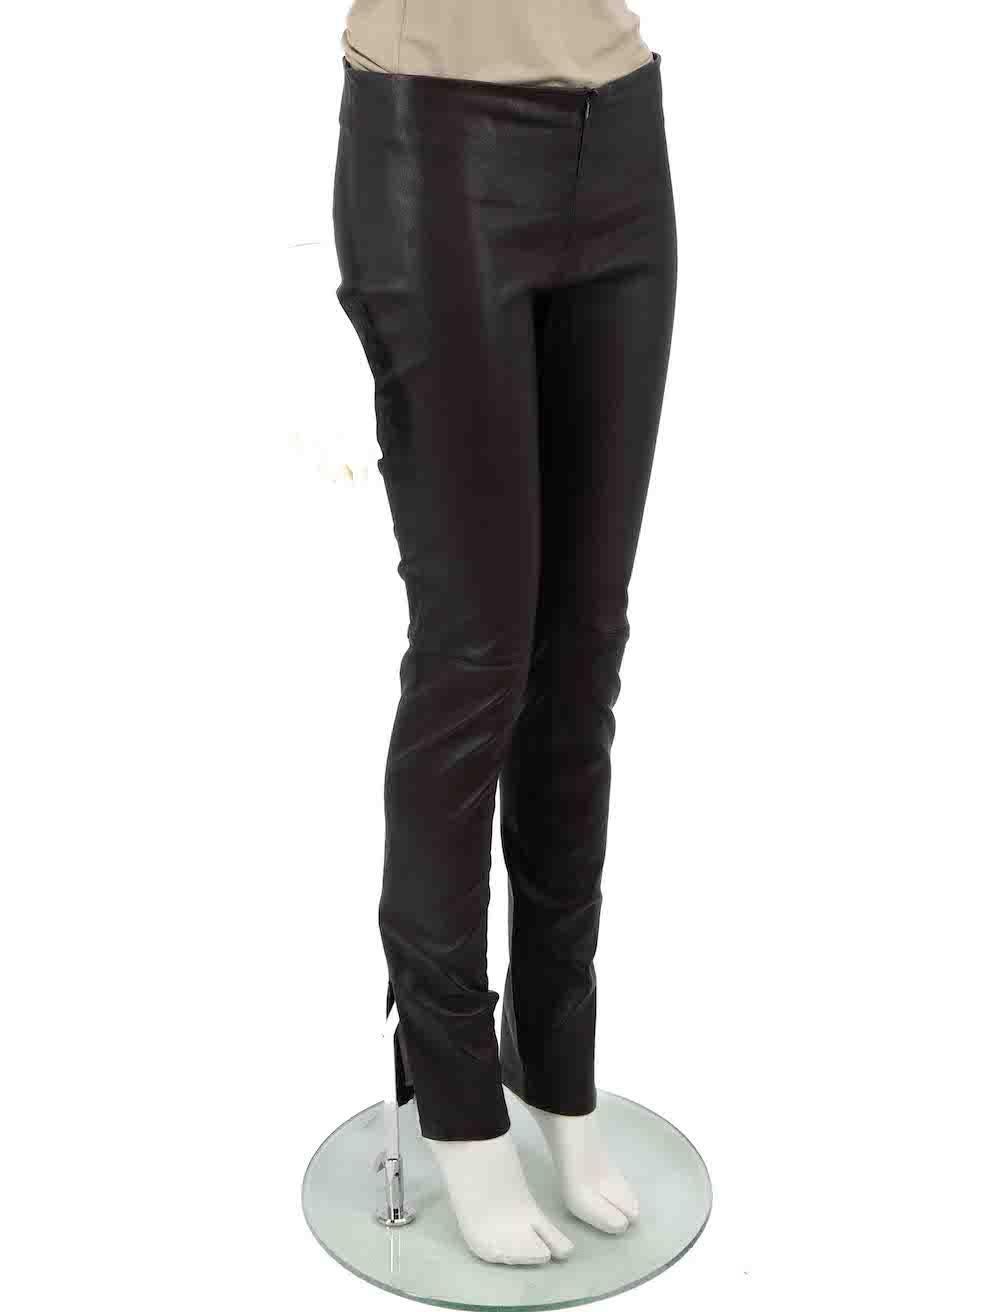 CONDITION is Very good. Hardly any visible wear to trousers is evident on this used Max & Moi designer resale item.
 
 
 
 Details
 
 
 Brown
 
 Leather
 
 Skinny trousers
 
 Low rise
 
 Stretchy
 
 Front zip closure
 
 Zipped cuffs
 
 
 
 
 
